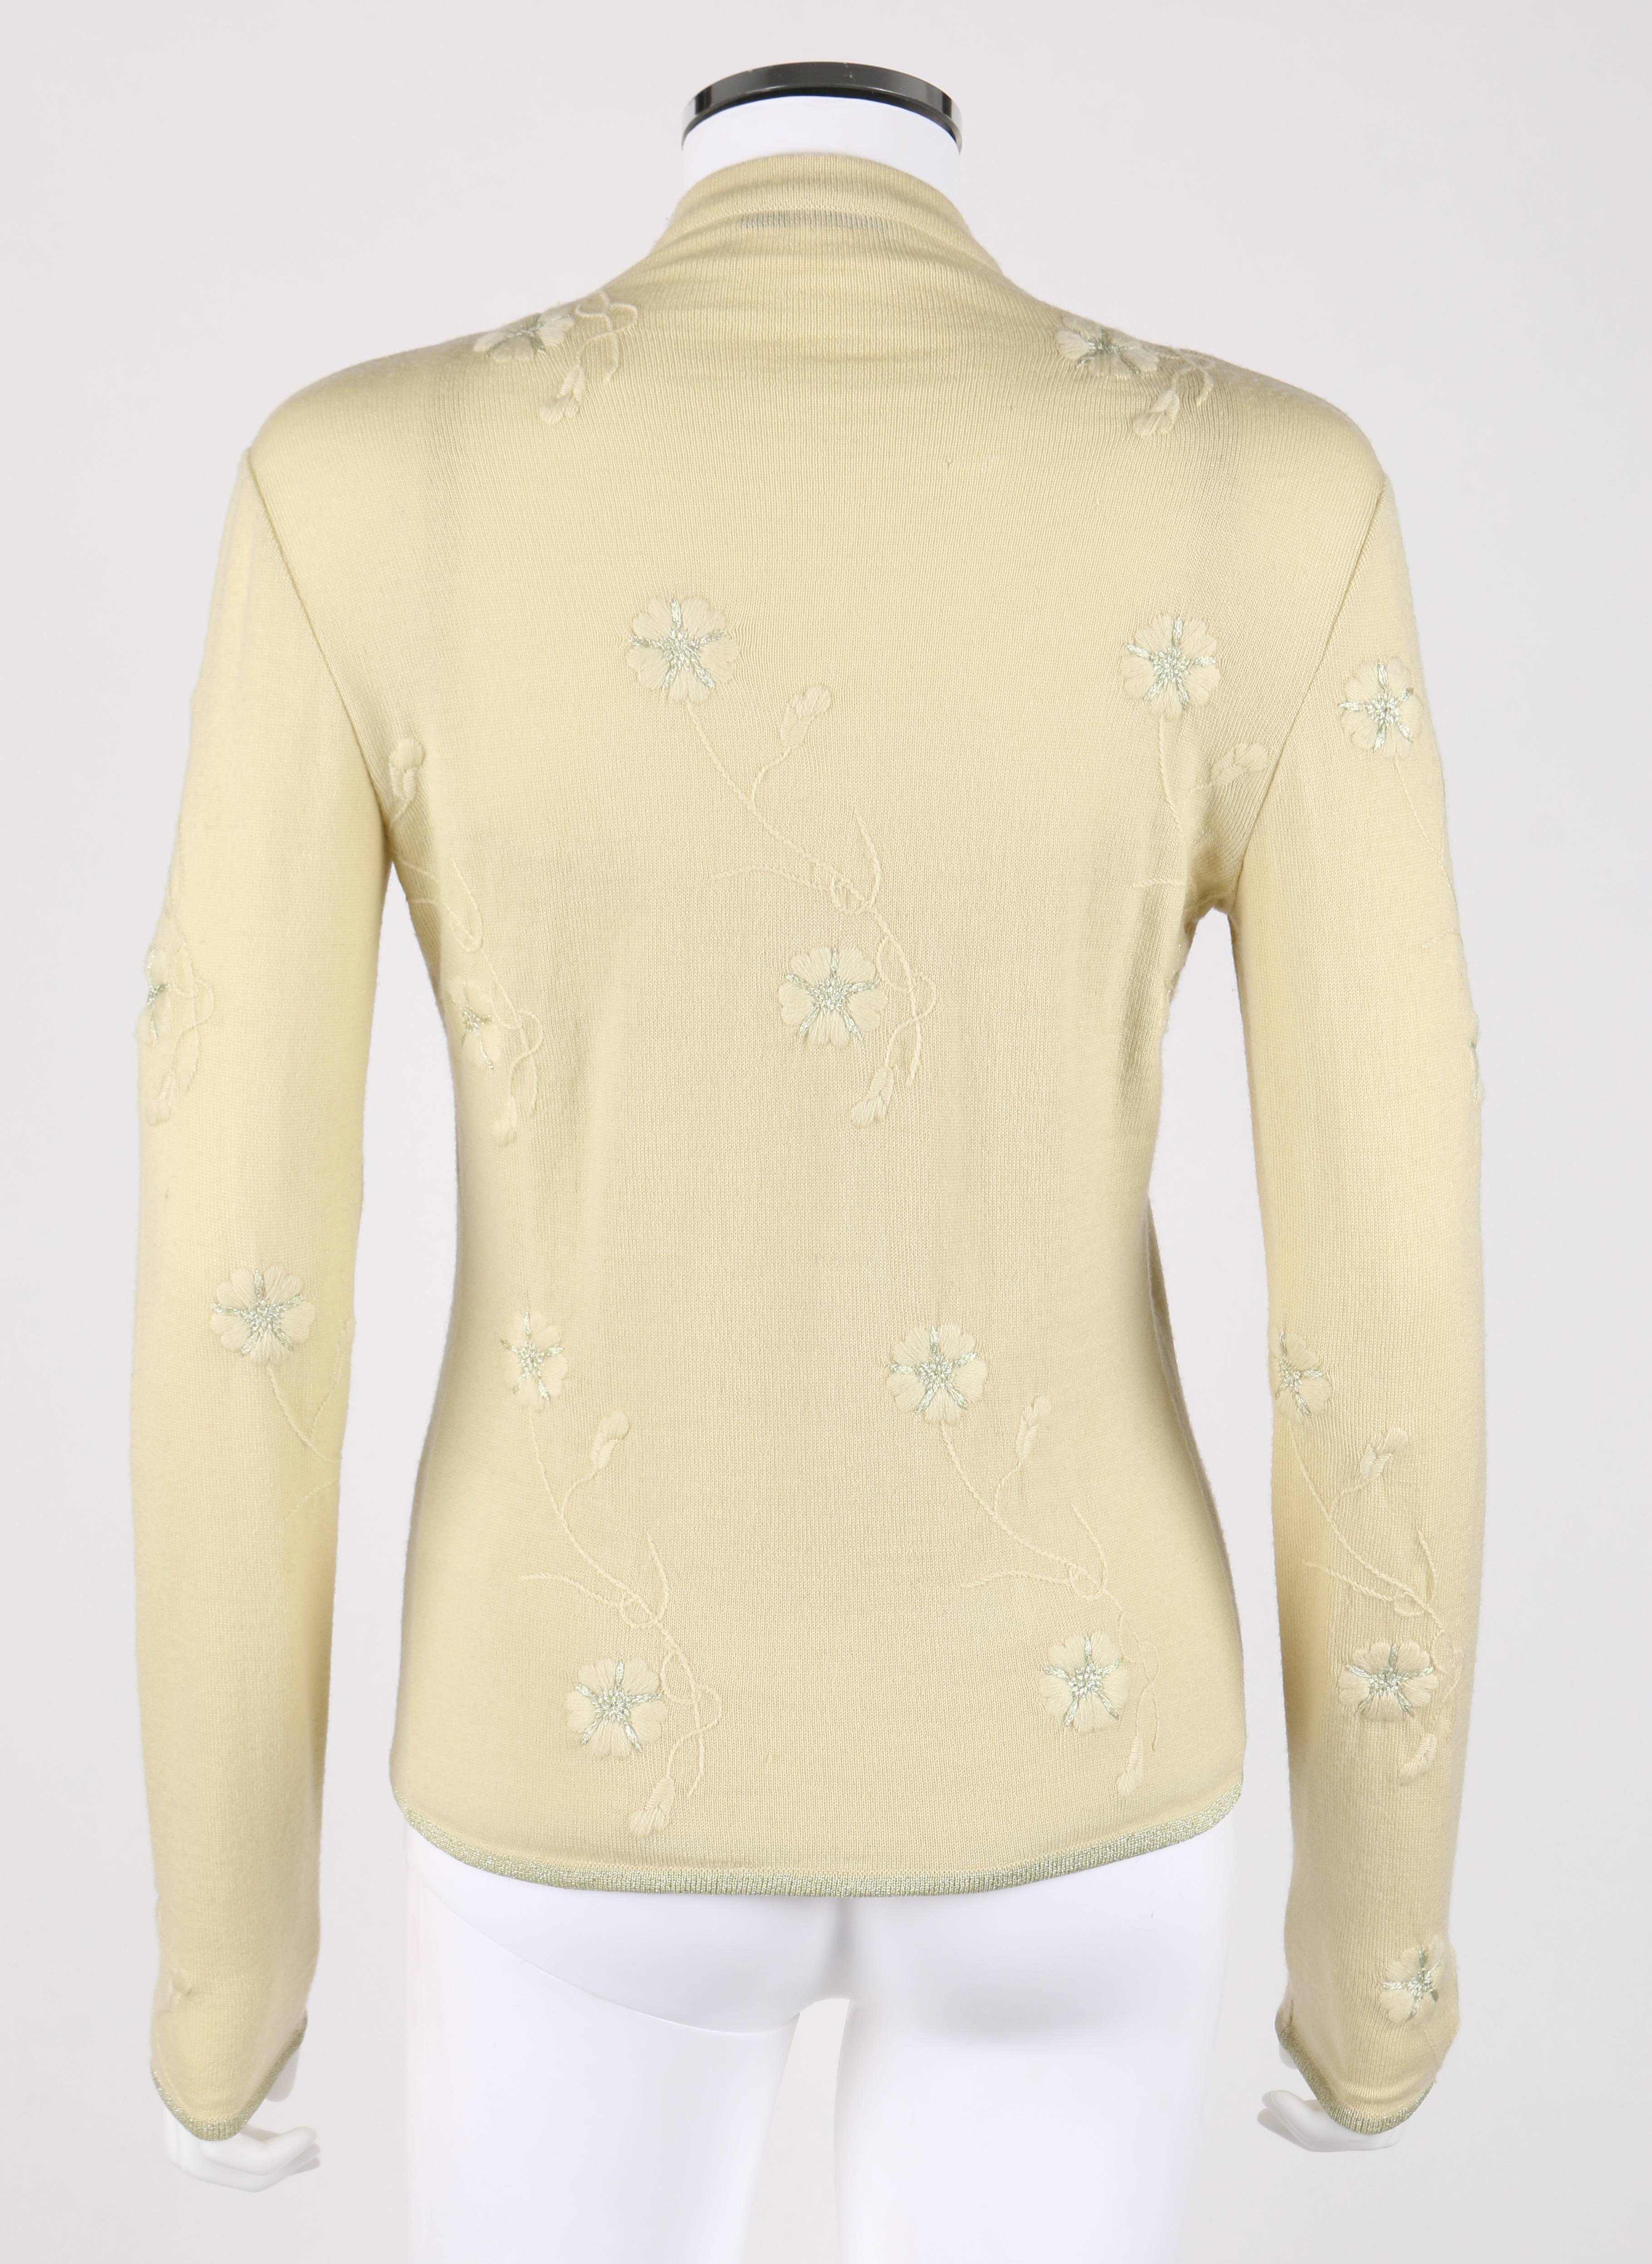 GIVENCHY Couture S/S 1998 ALEXANDER MCQUEEN Pale Yellow Floral Cardigan Top Set In Excellent Condition For Sale In Thiensville, WI